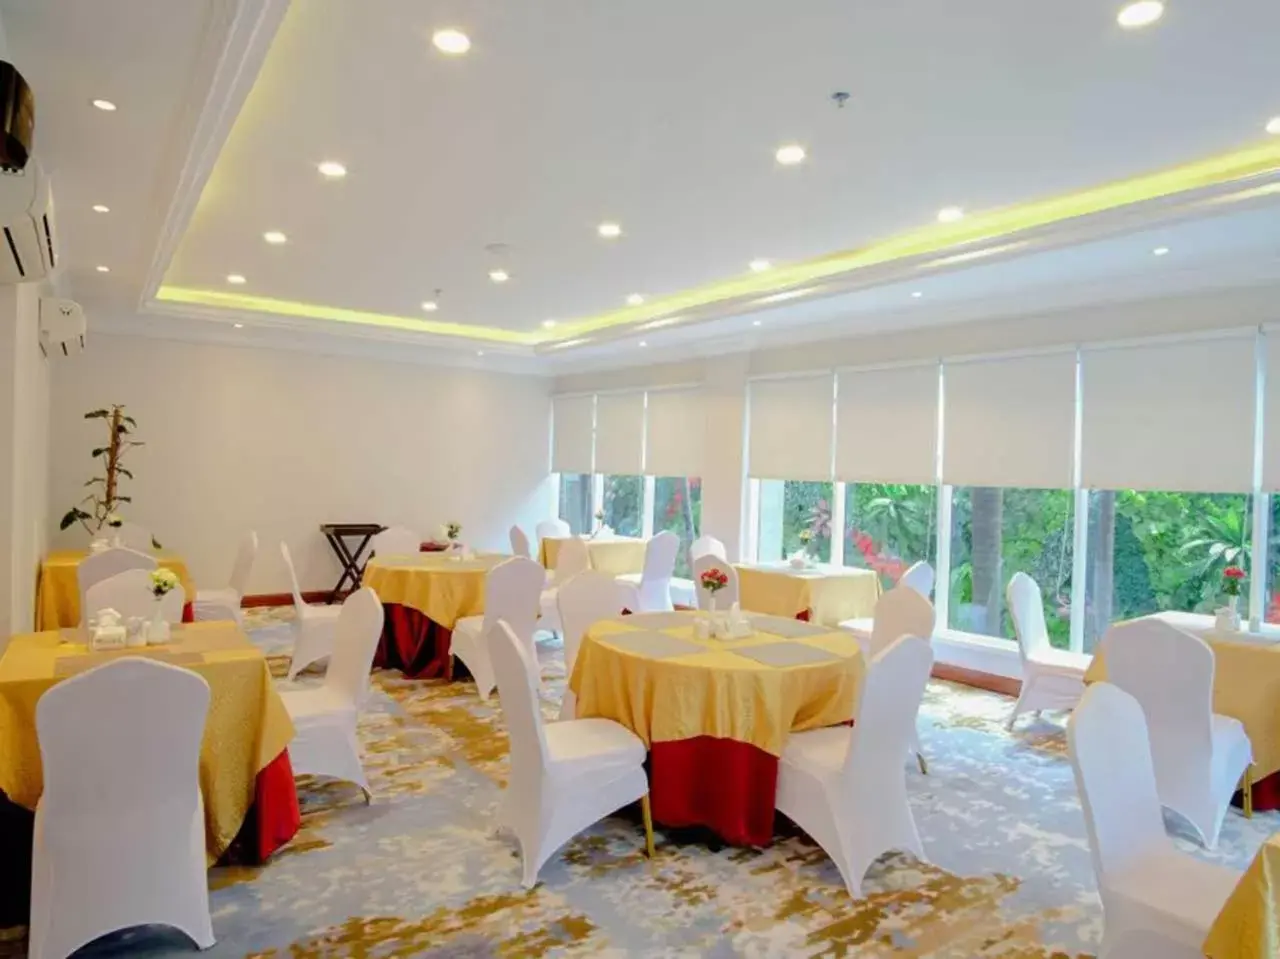 Property building, Banquet Facilities in Sapphire Sky Hotel & Conference